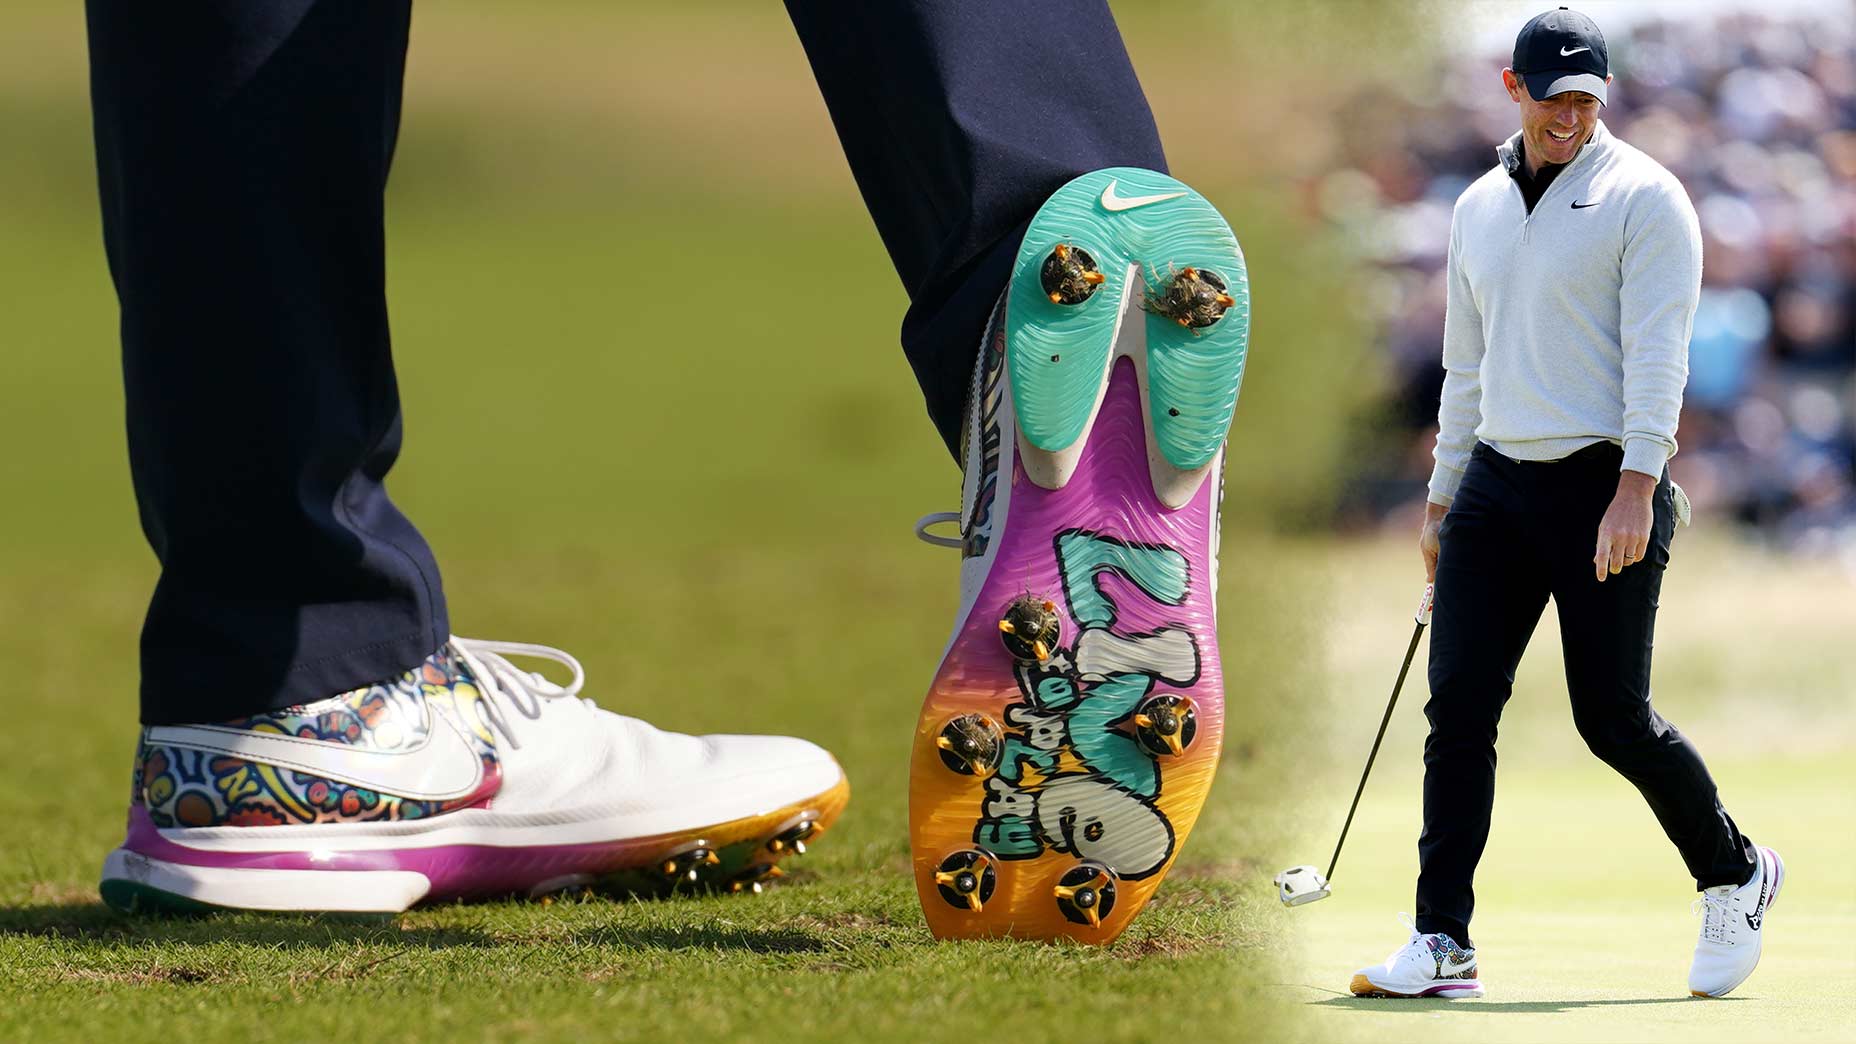 Get these Nike golf shoes The Open before your size sells out